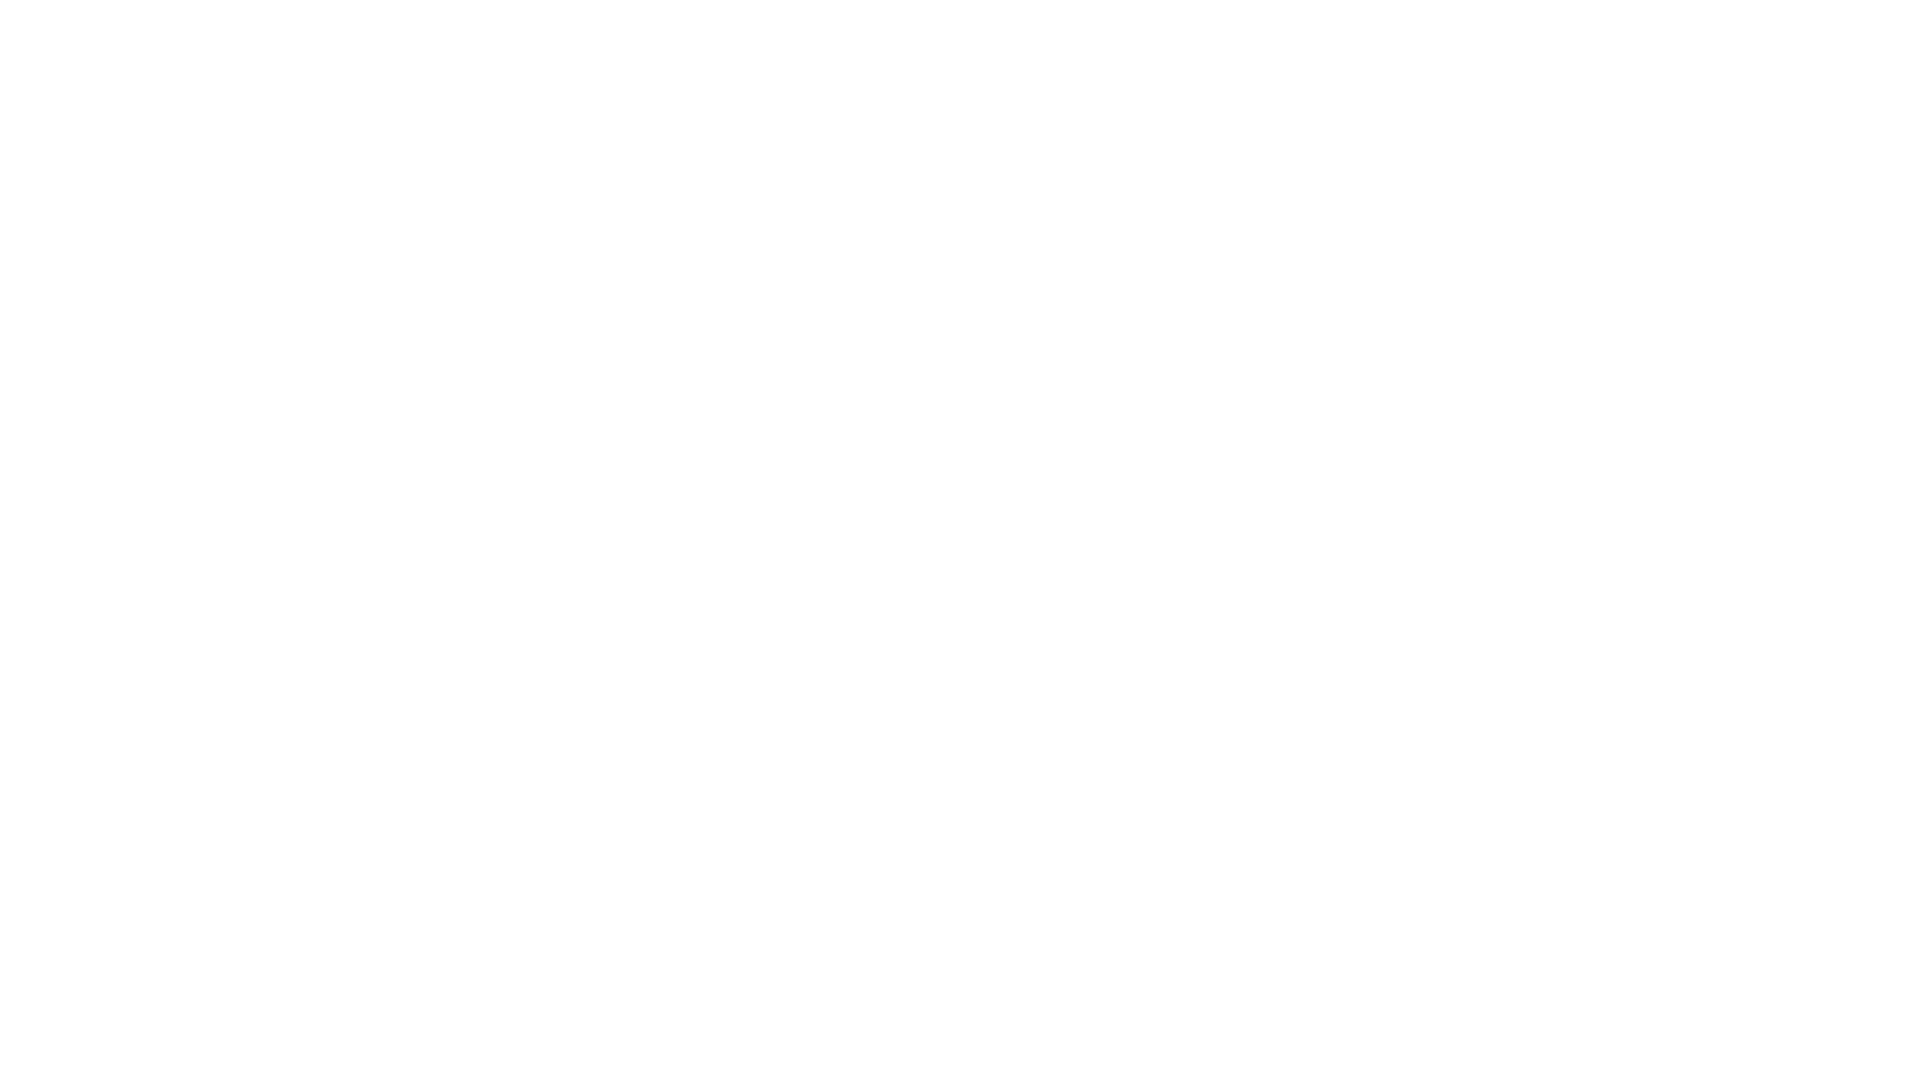 Maintainable Living